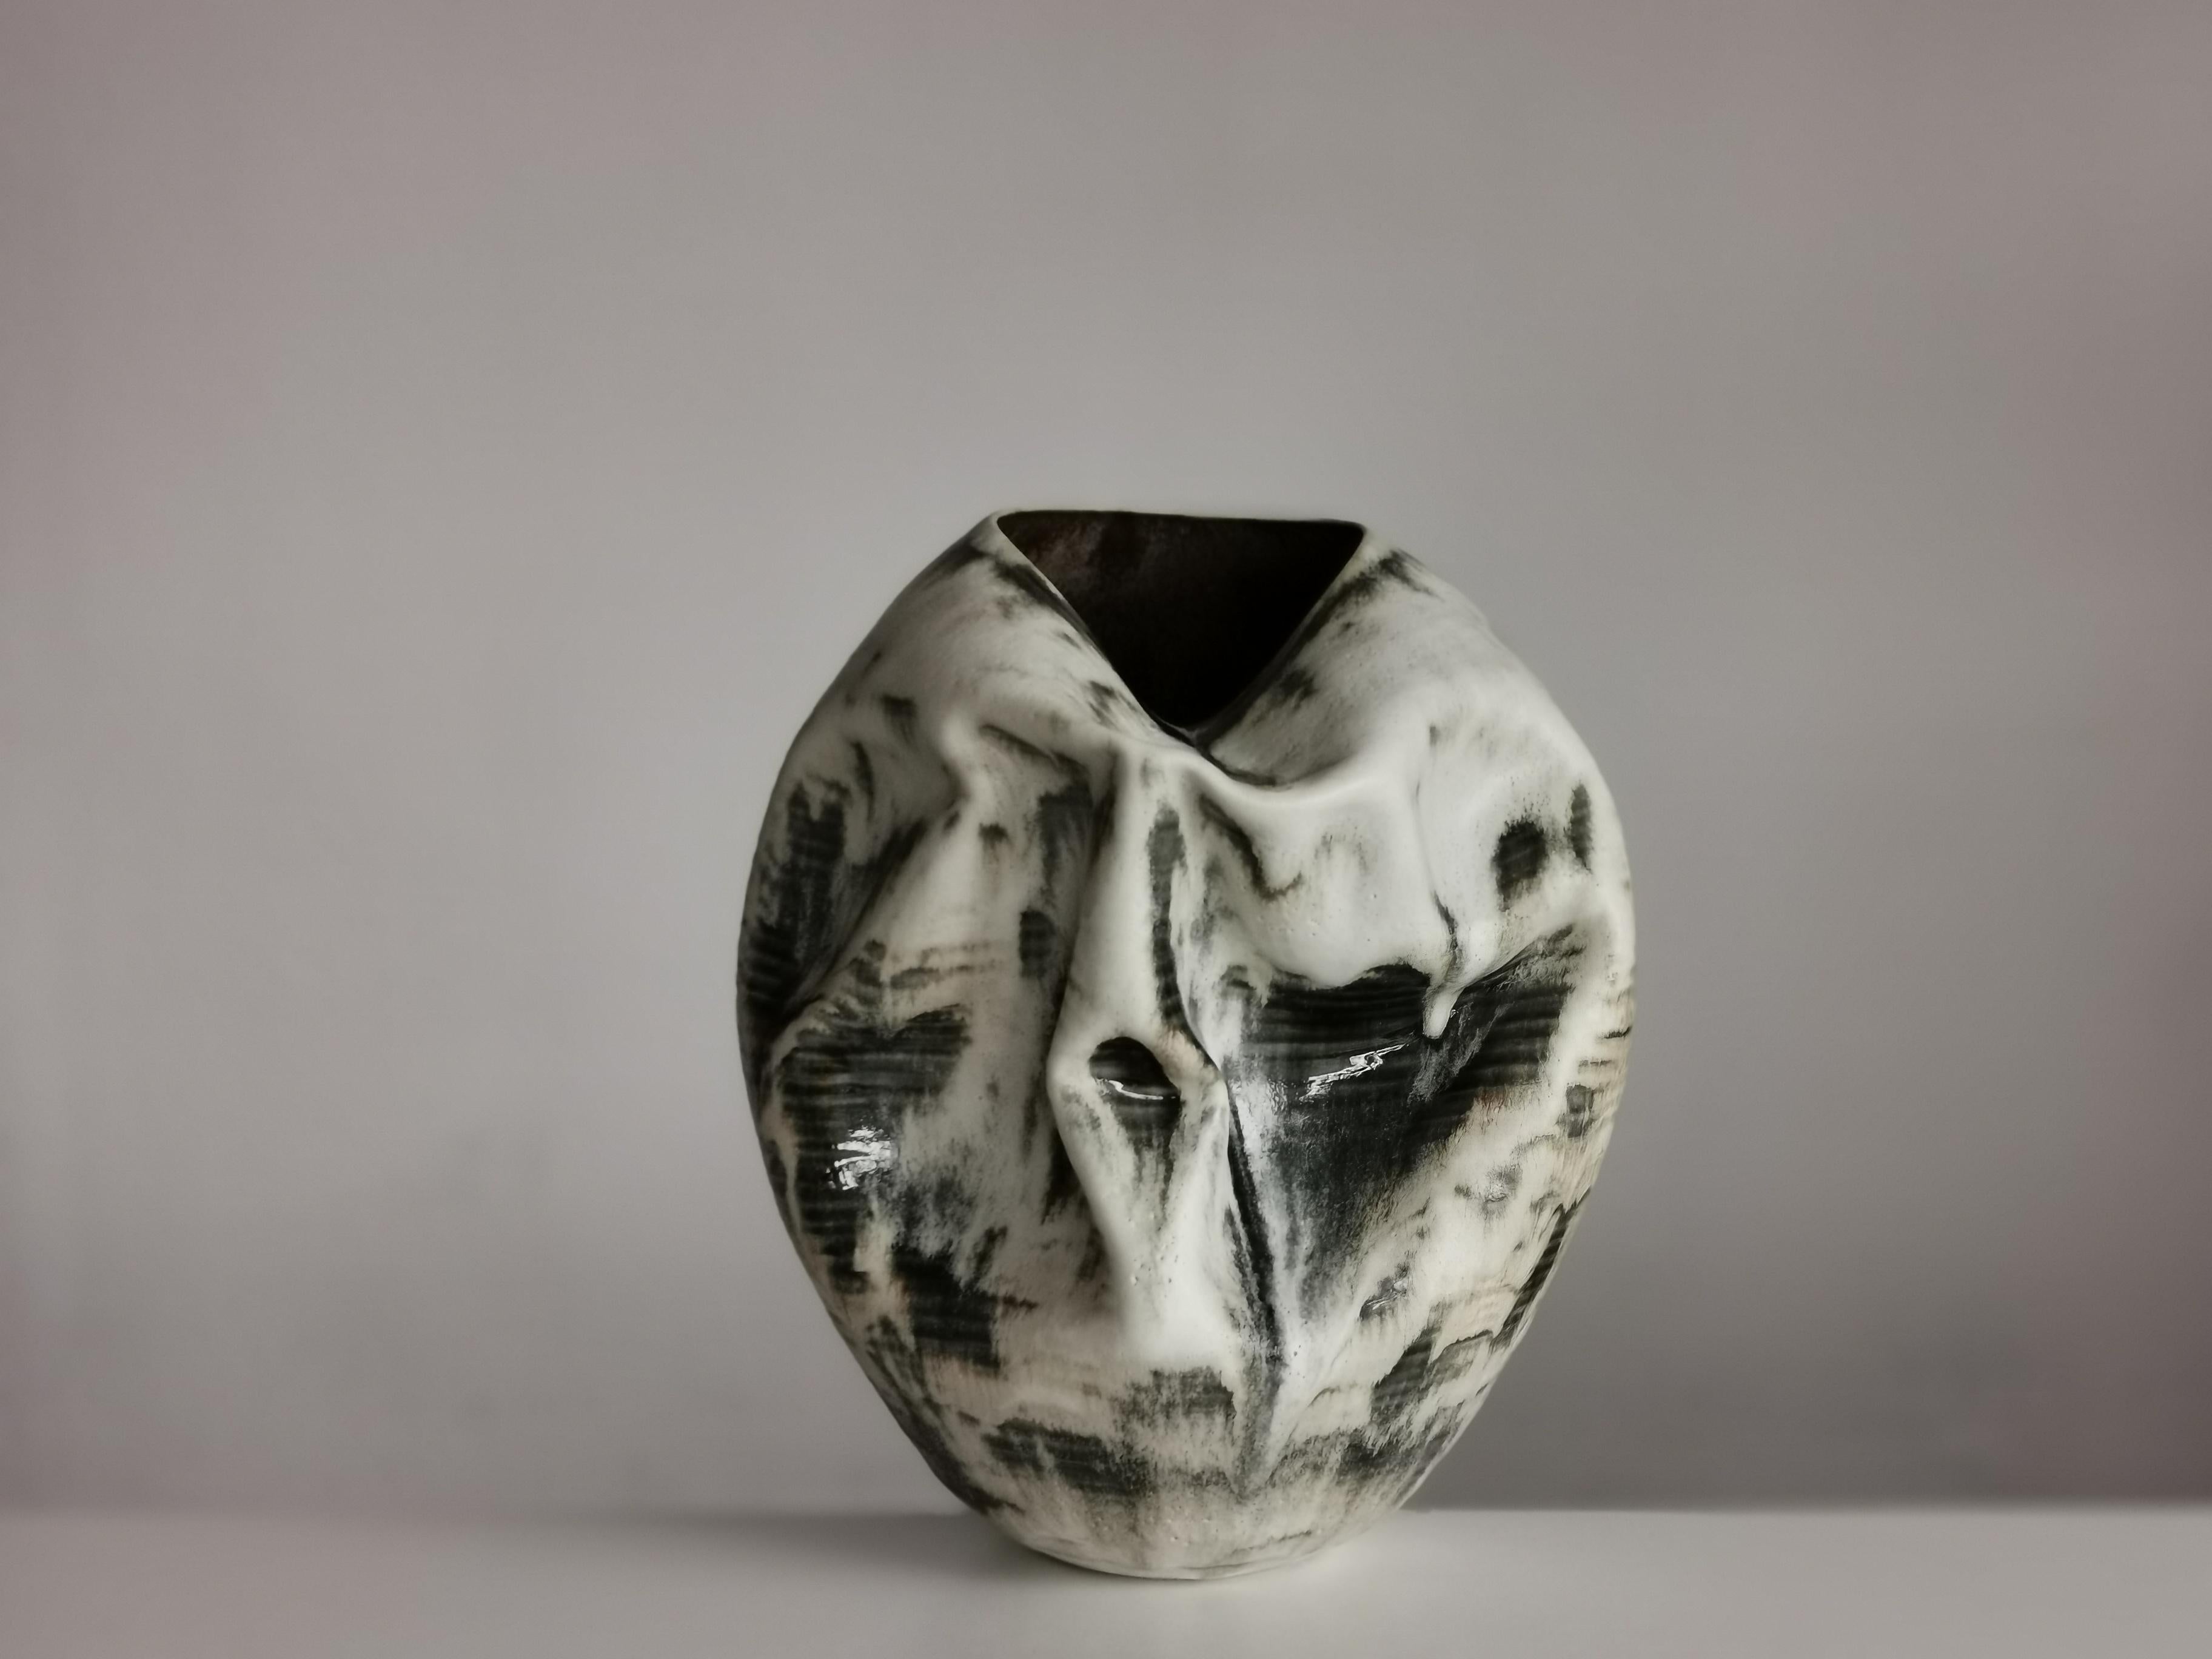 N. 74 white distorted form with green glaze highlights. Sumptuous ceramic vessel from ceramic artist Nicholas Arroyave-Portela.

Materials, White St. Thomas clay, Stoneware glazes, Multi fired to cone 9 (1260 degrees)

H 37 cm W 30 cm D 30